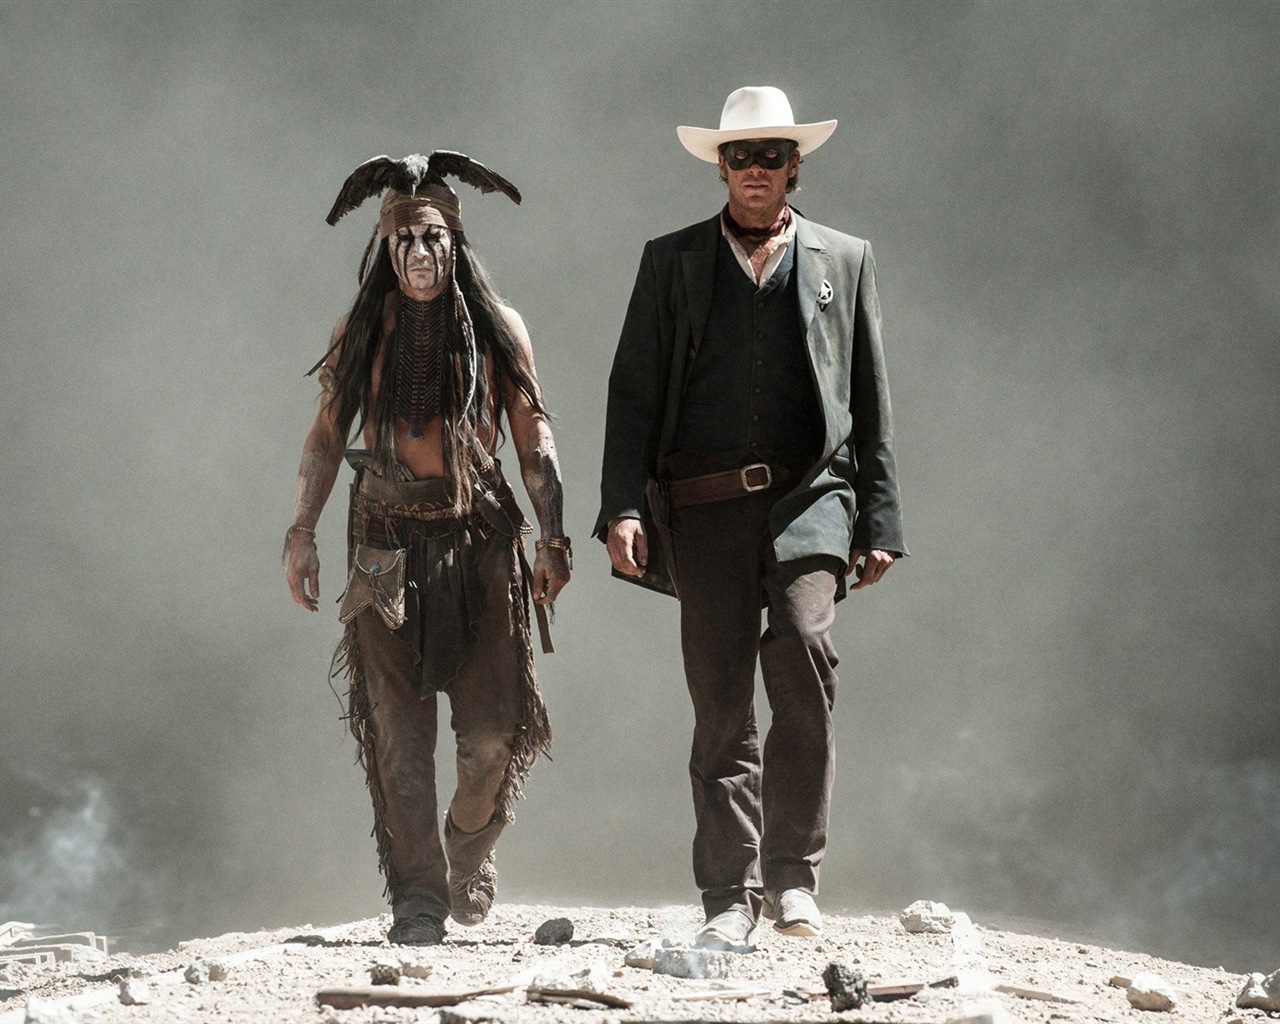 The Lone Ranger HD movie wallpapers #4 - 1280x1024